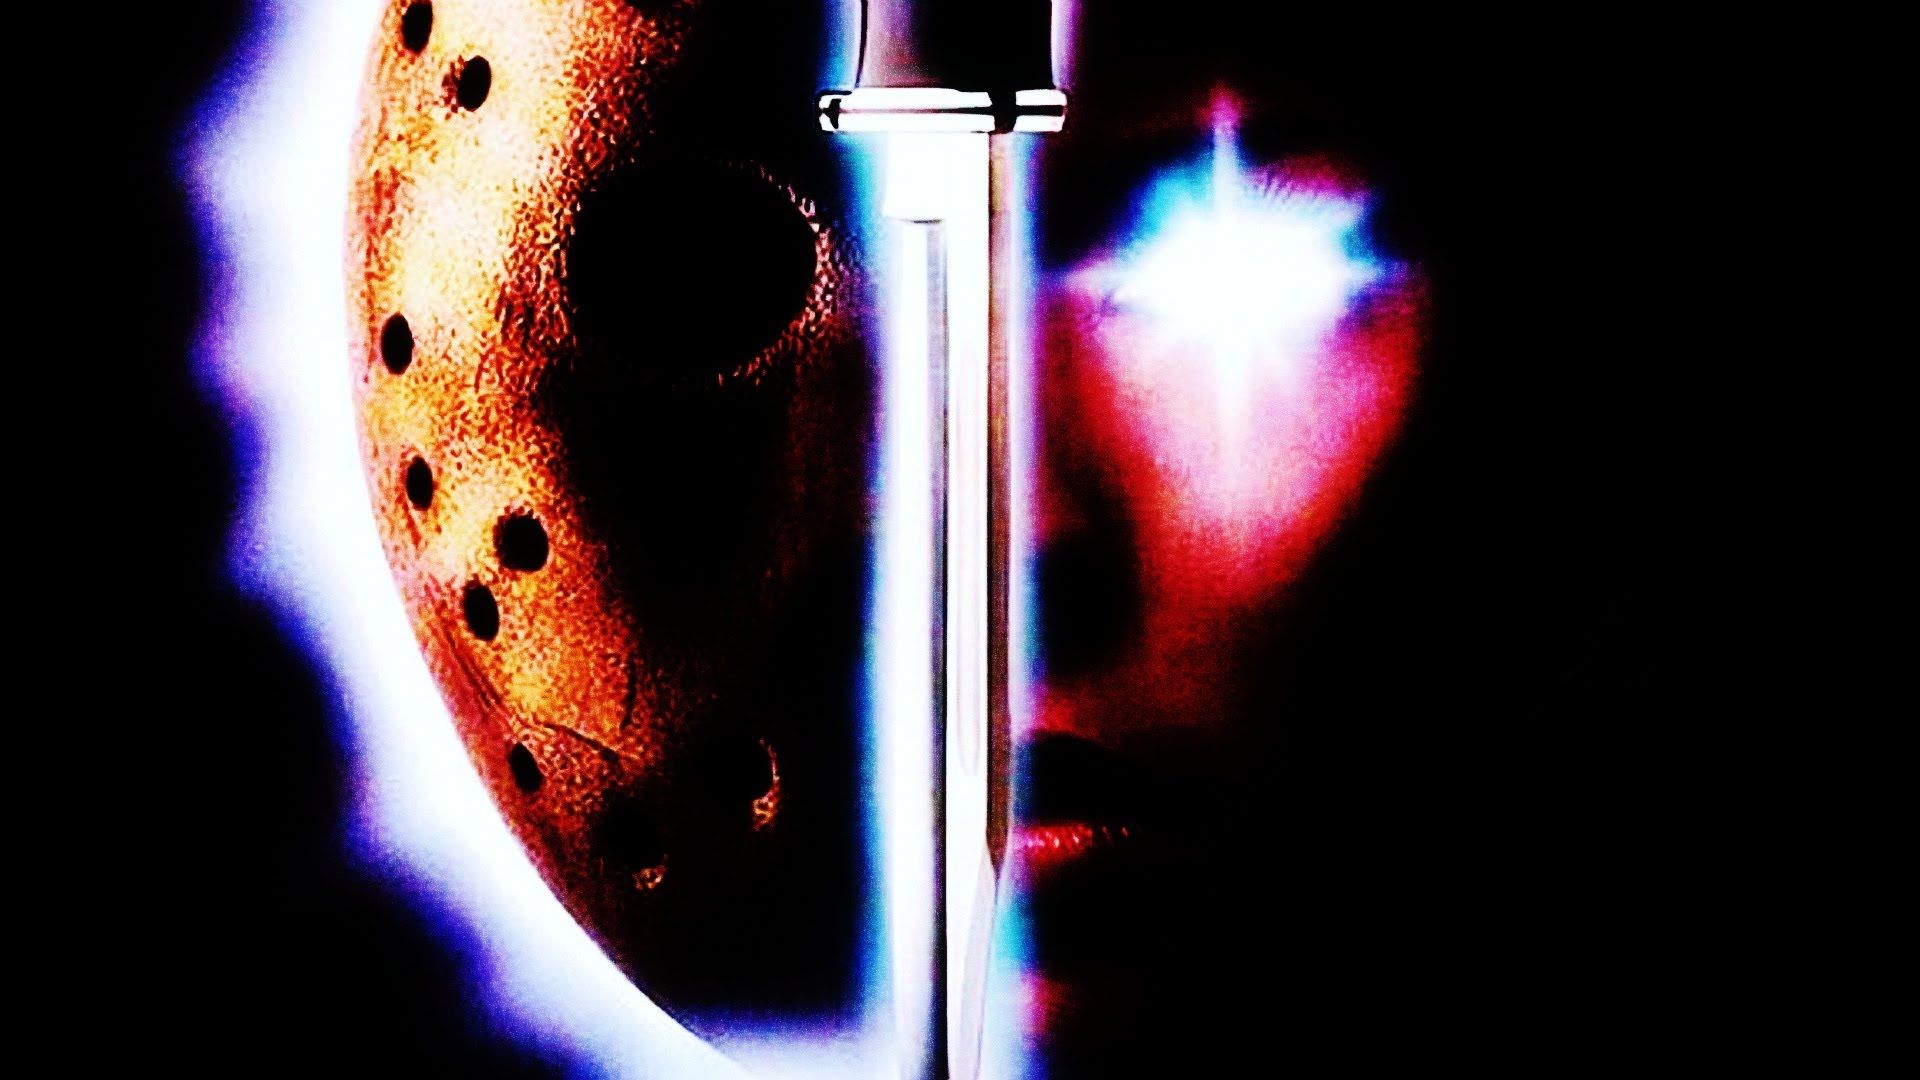 Friday the 13th Part VII: The New Blood background